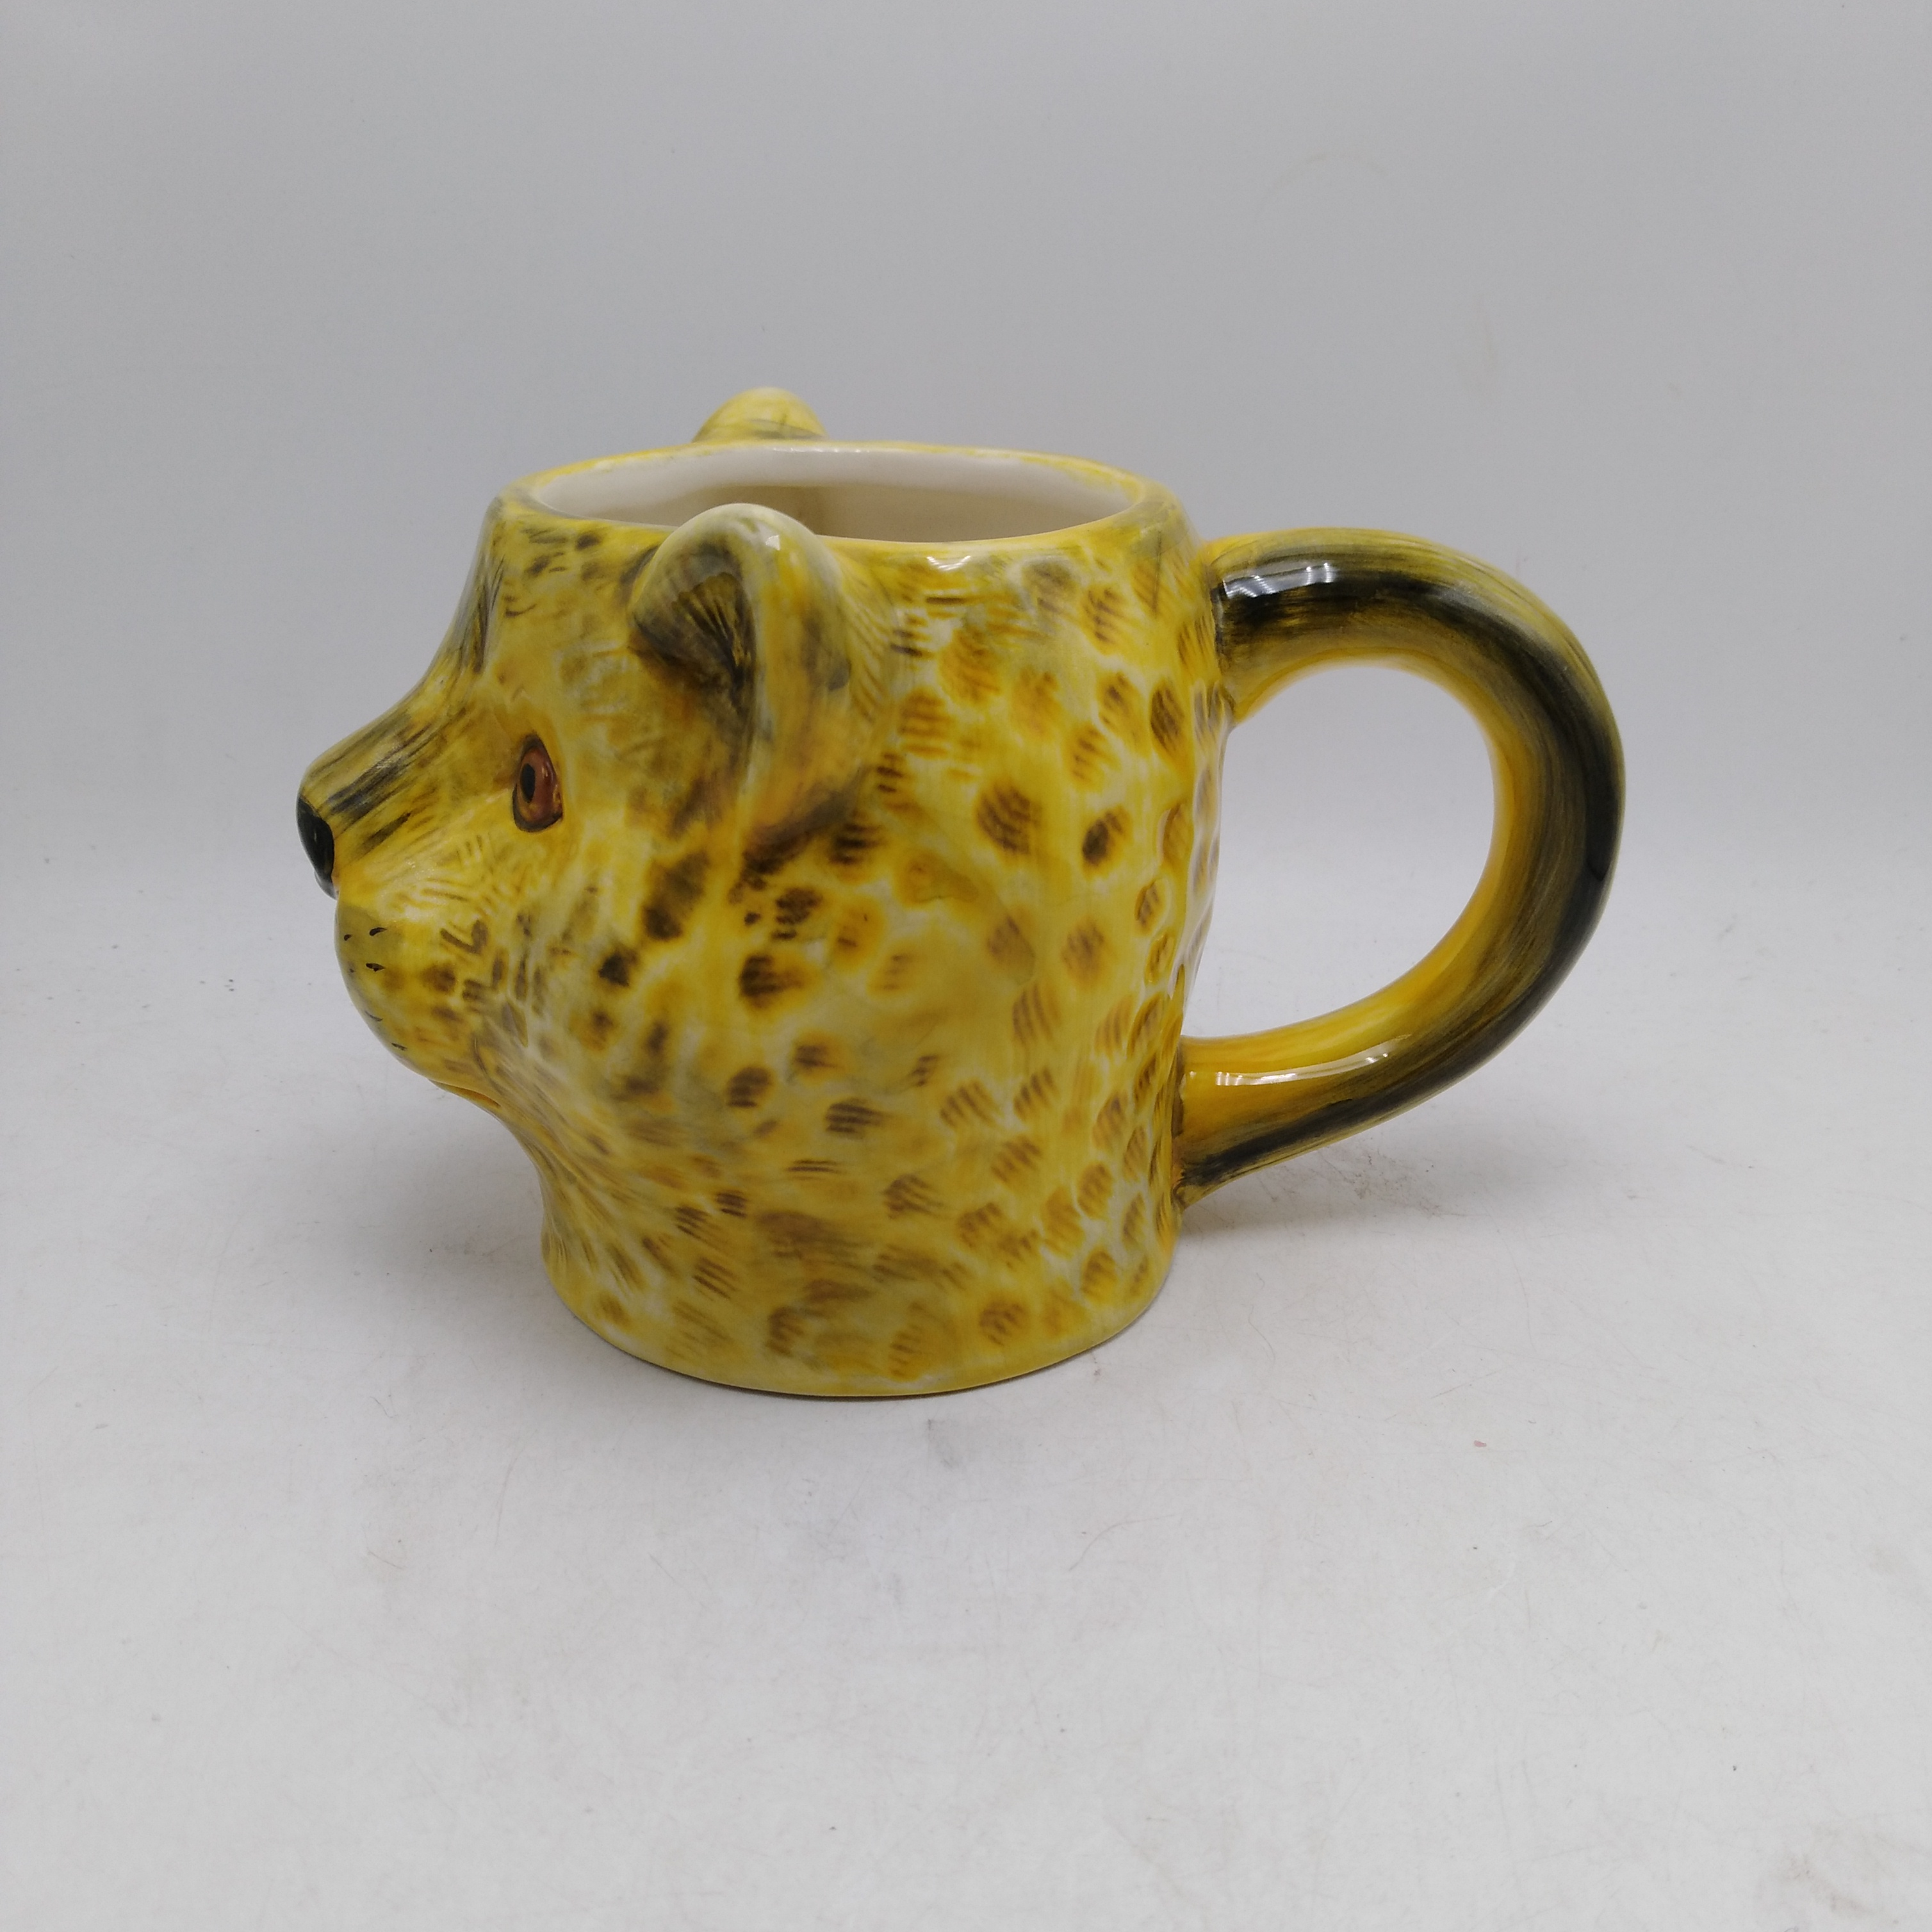 Leopard Mug 3D Blue Witch Brand Hand Painted Ceramic Coffee Cocoa